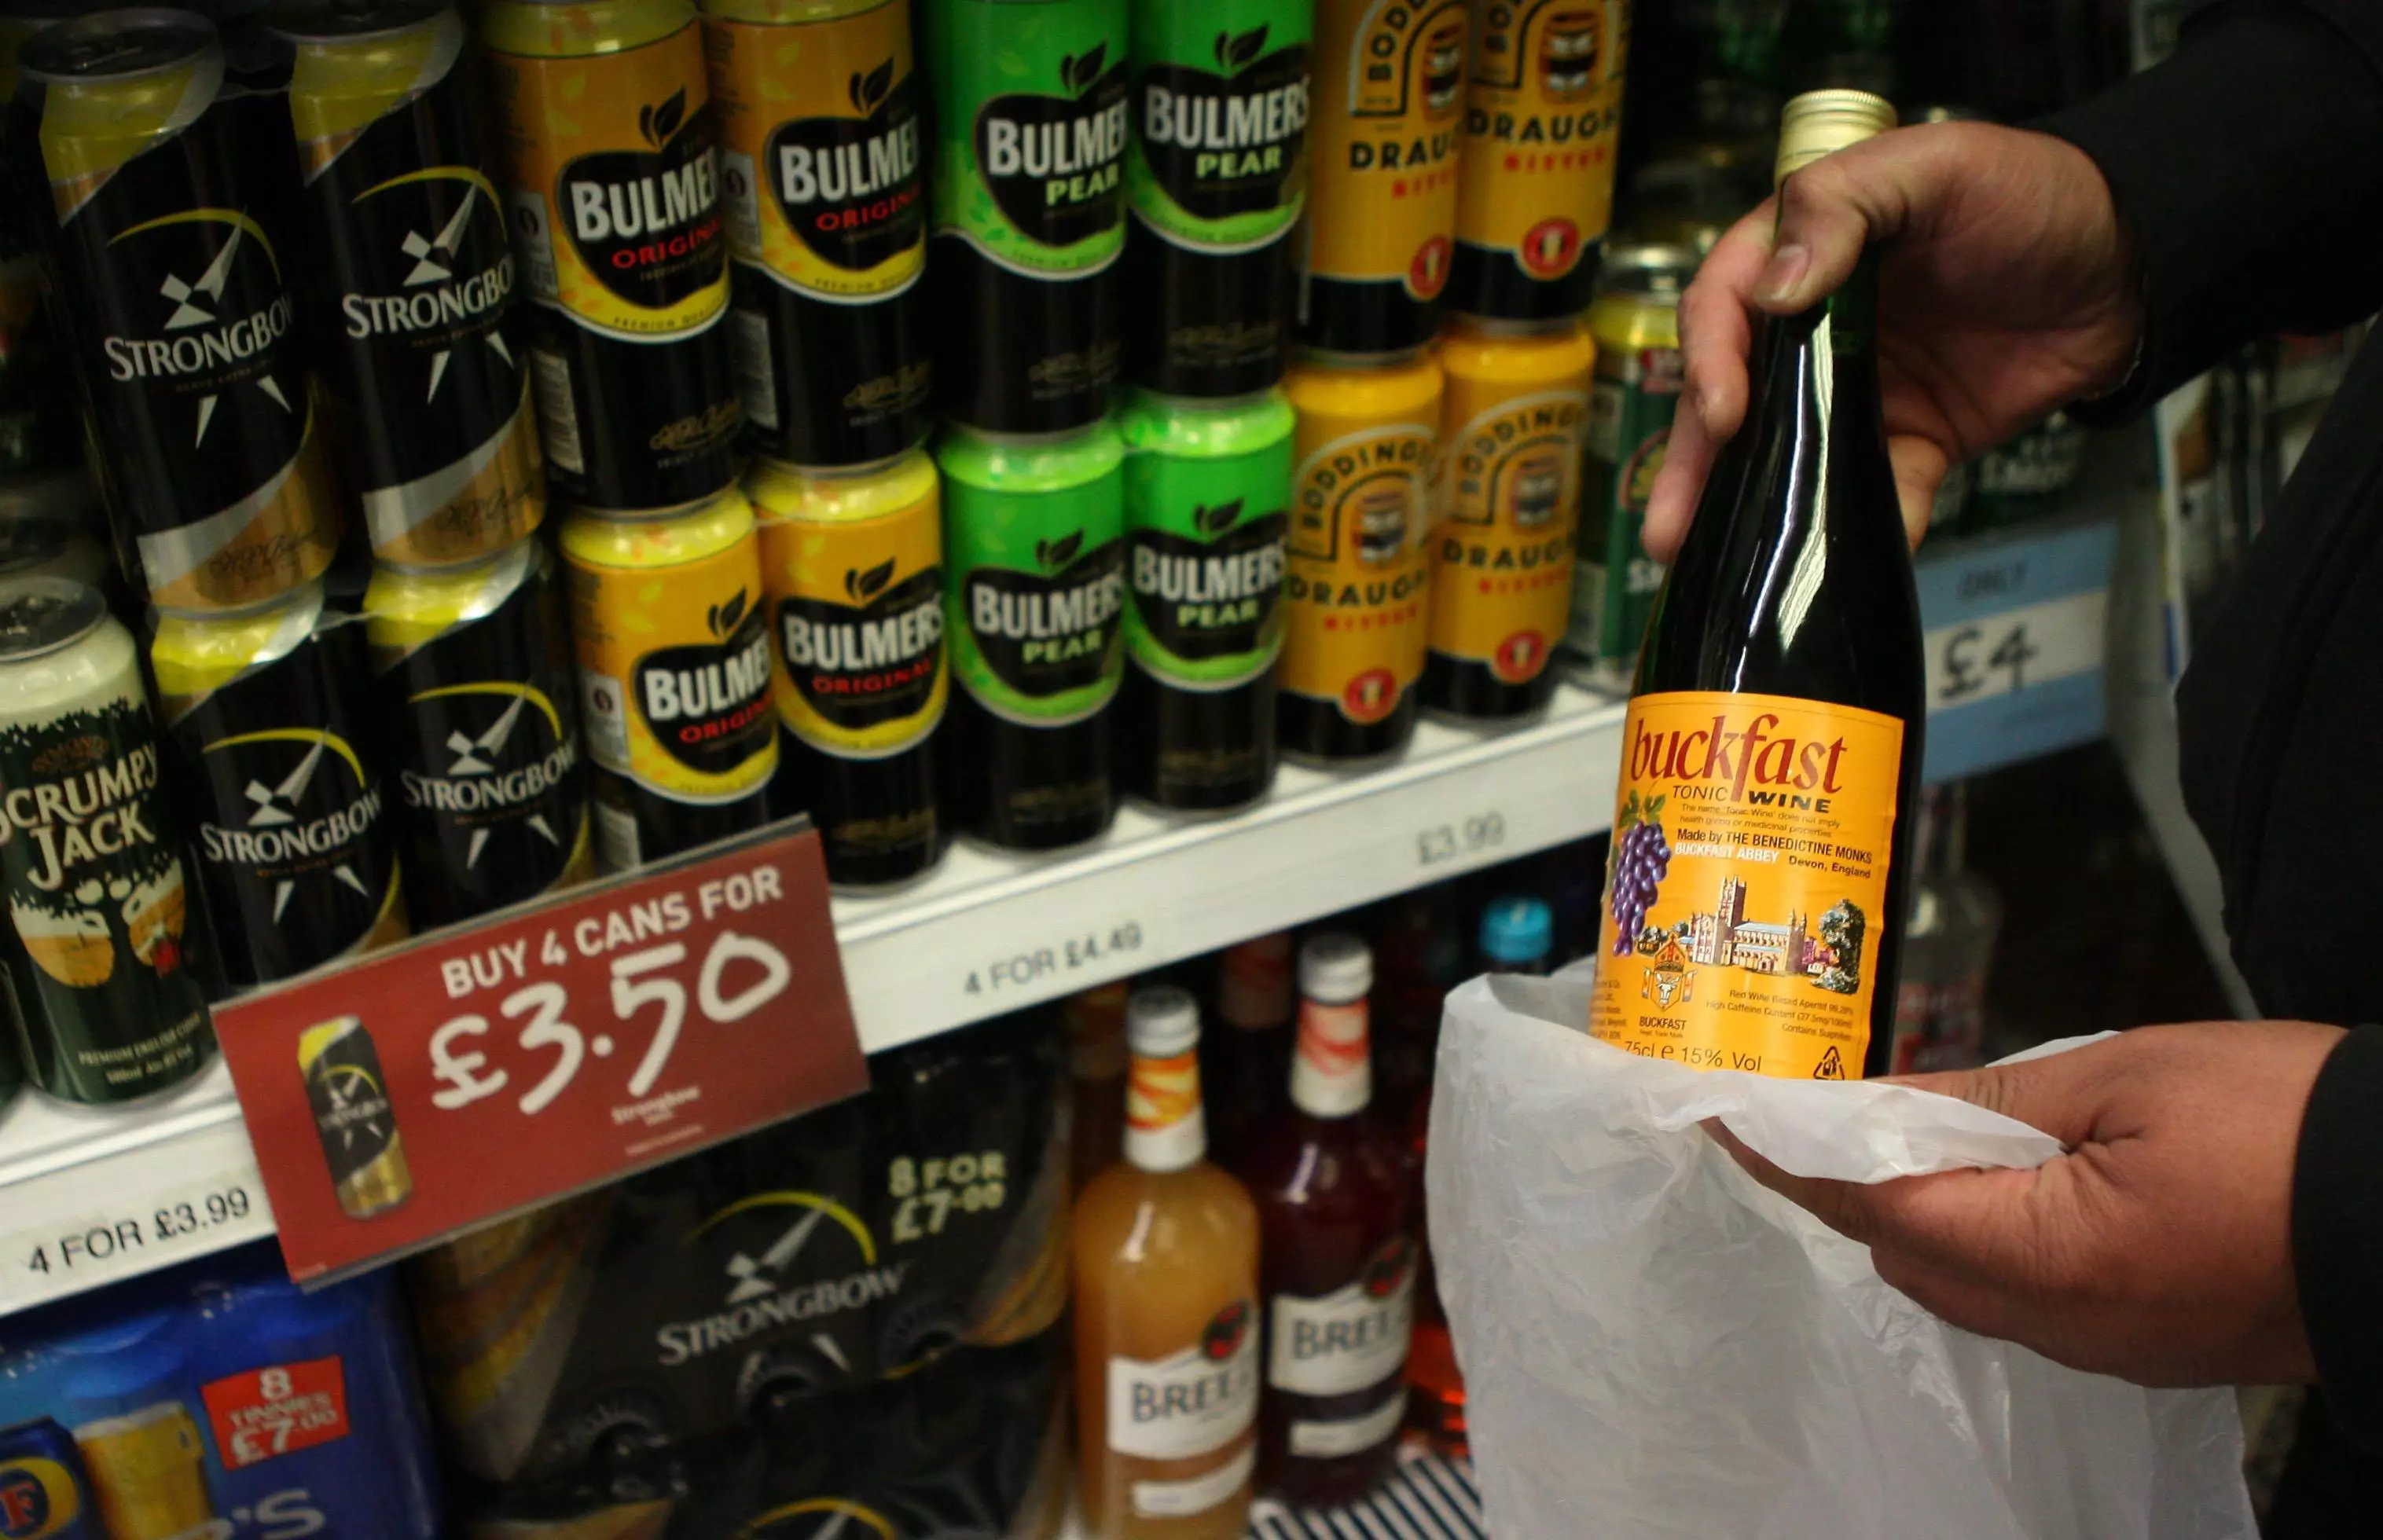 Make sure you drink responsibly if you're celebrating World Buckfast Day today.